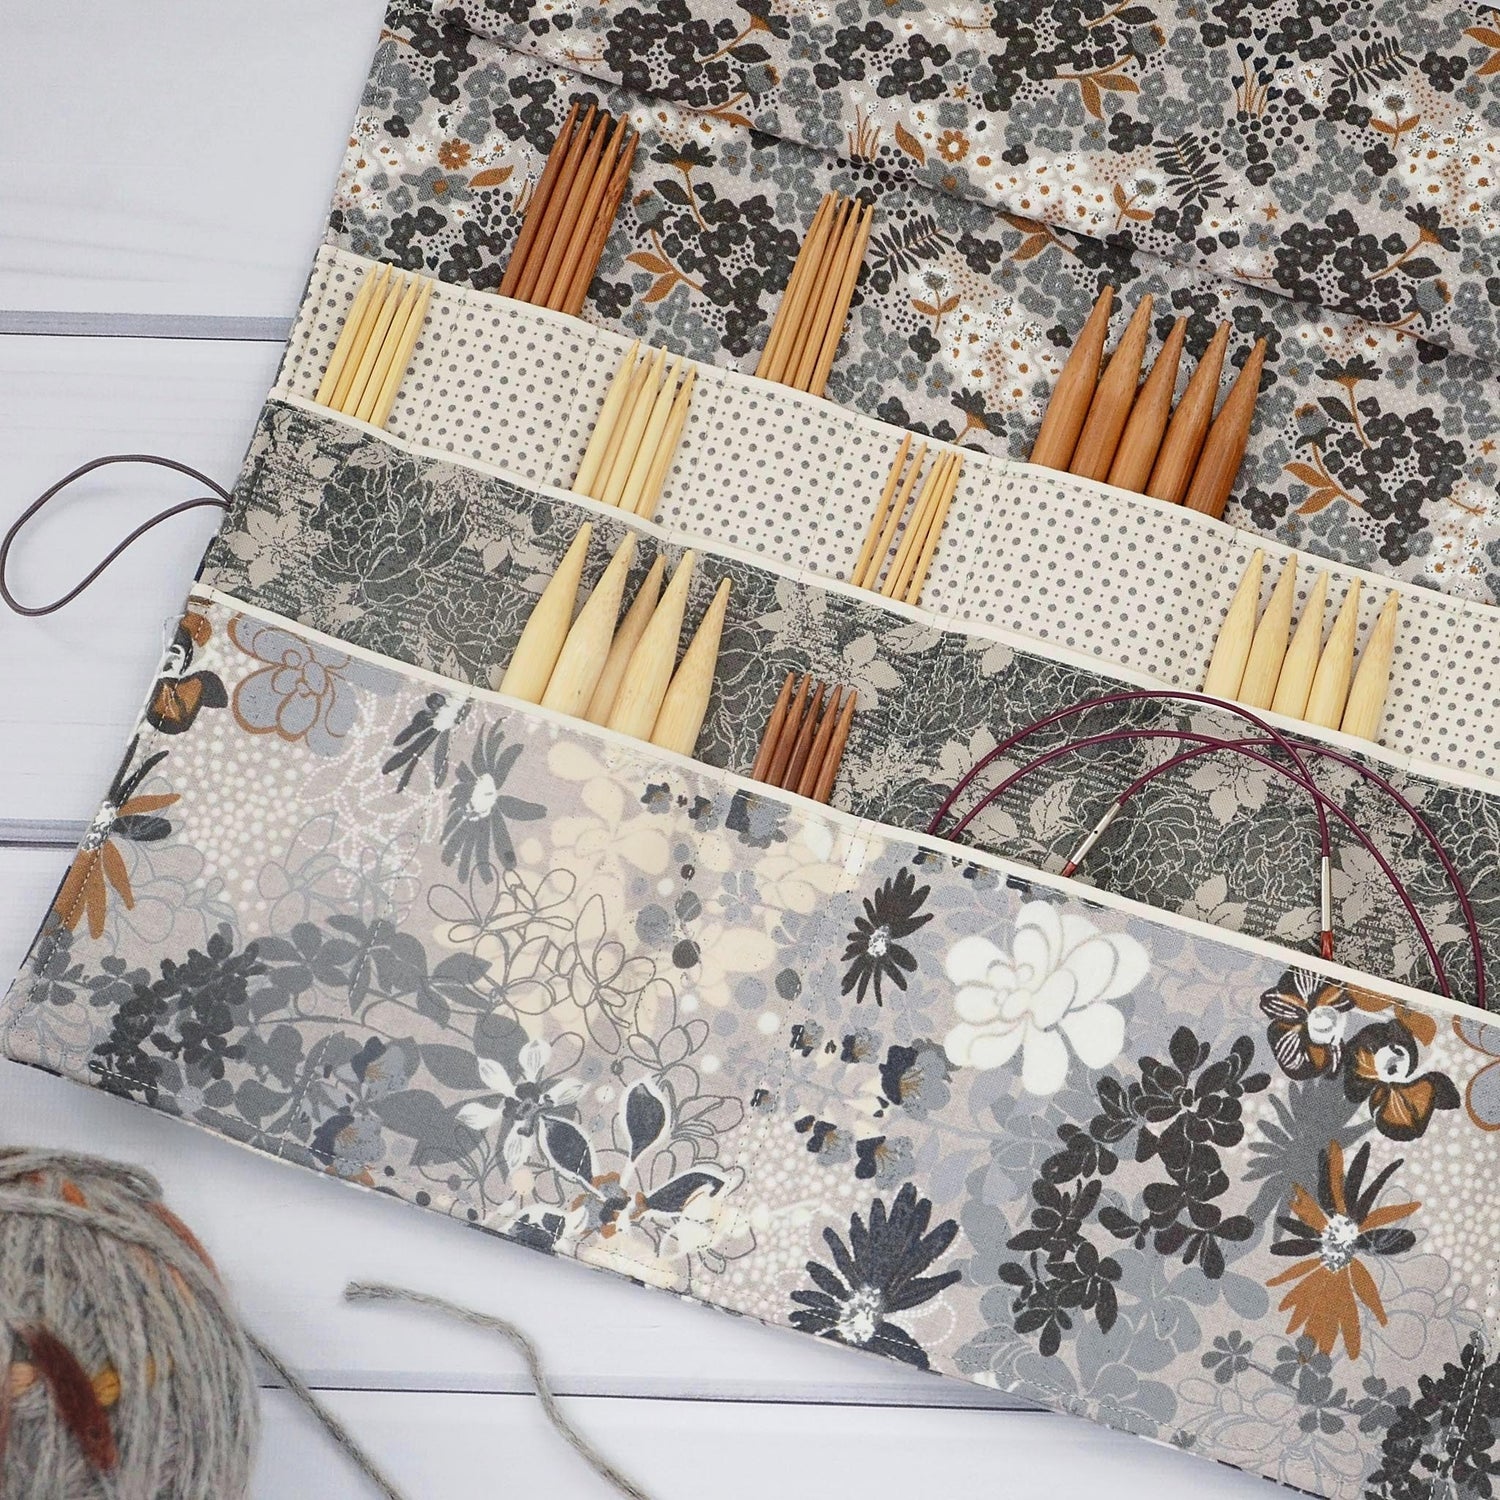 Large knitting needle tri-fold wrap in grey floral with bronze accents.  Made by Yellow Petal Handmade in Nova Scotia, Canada.